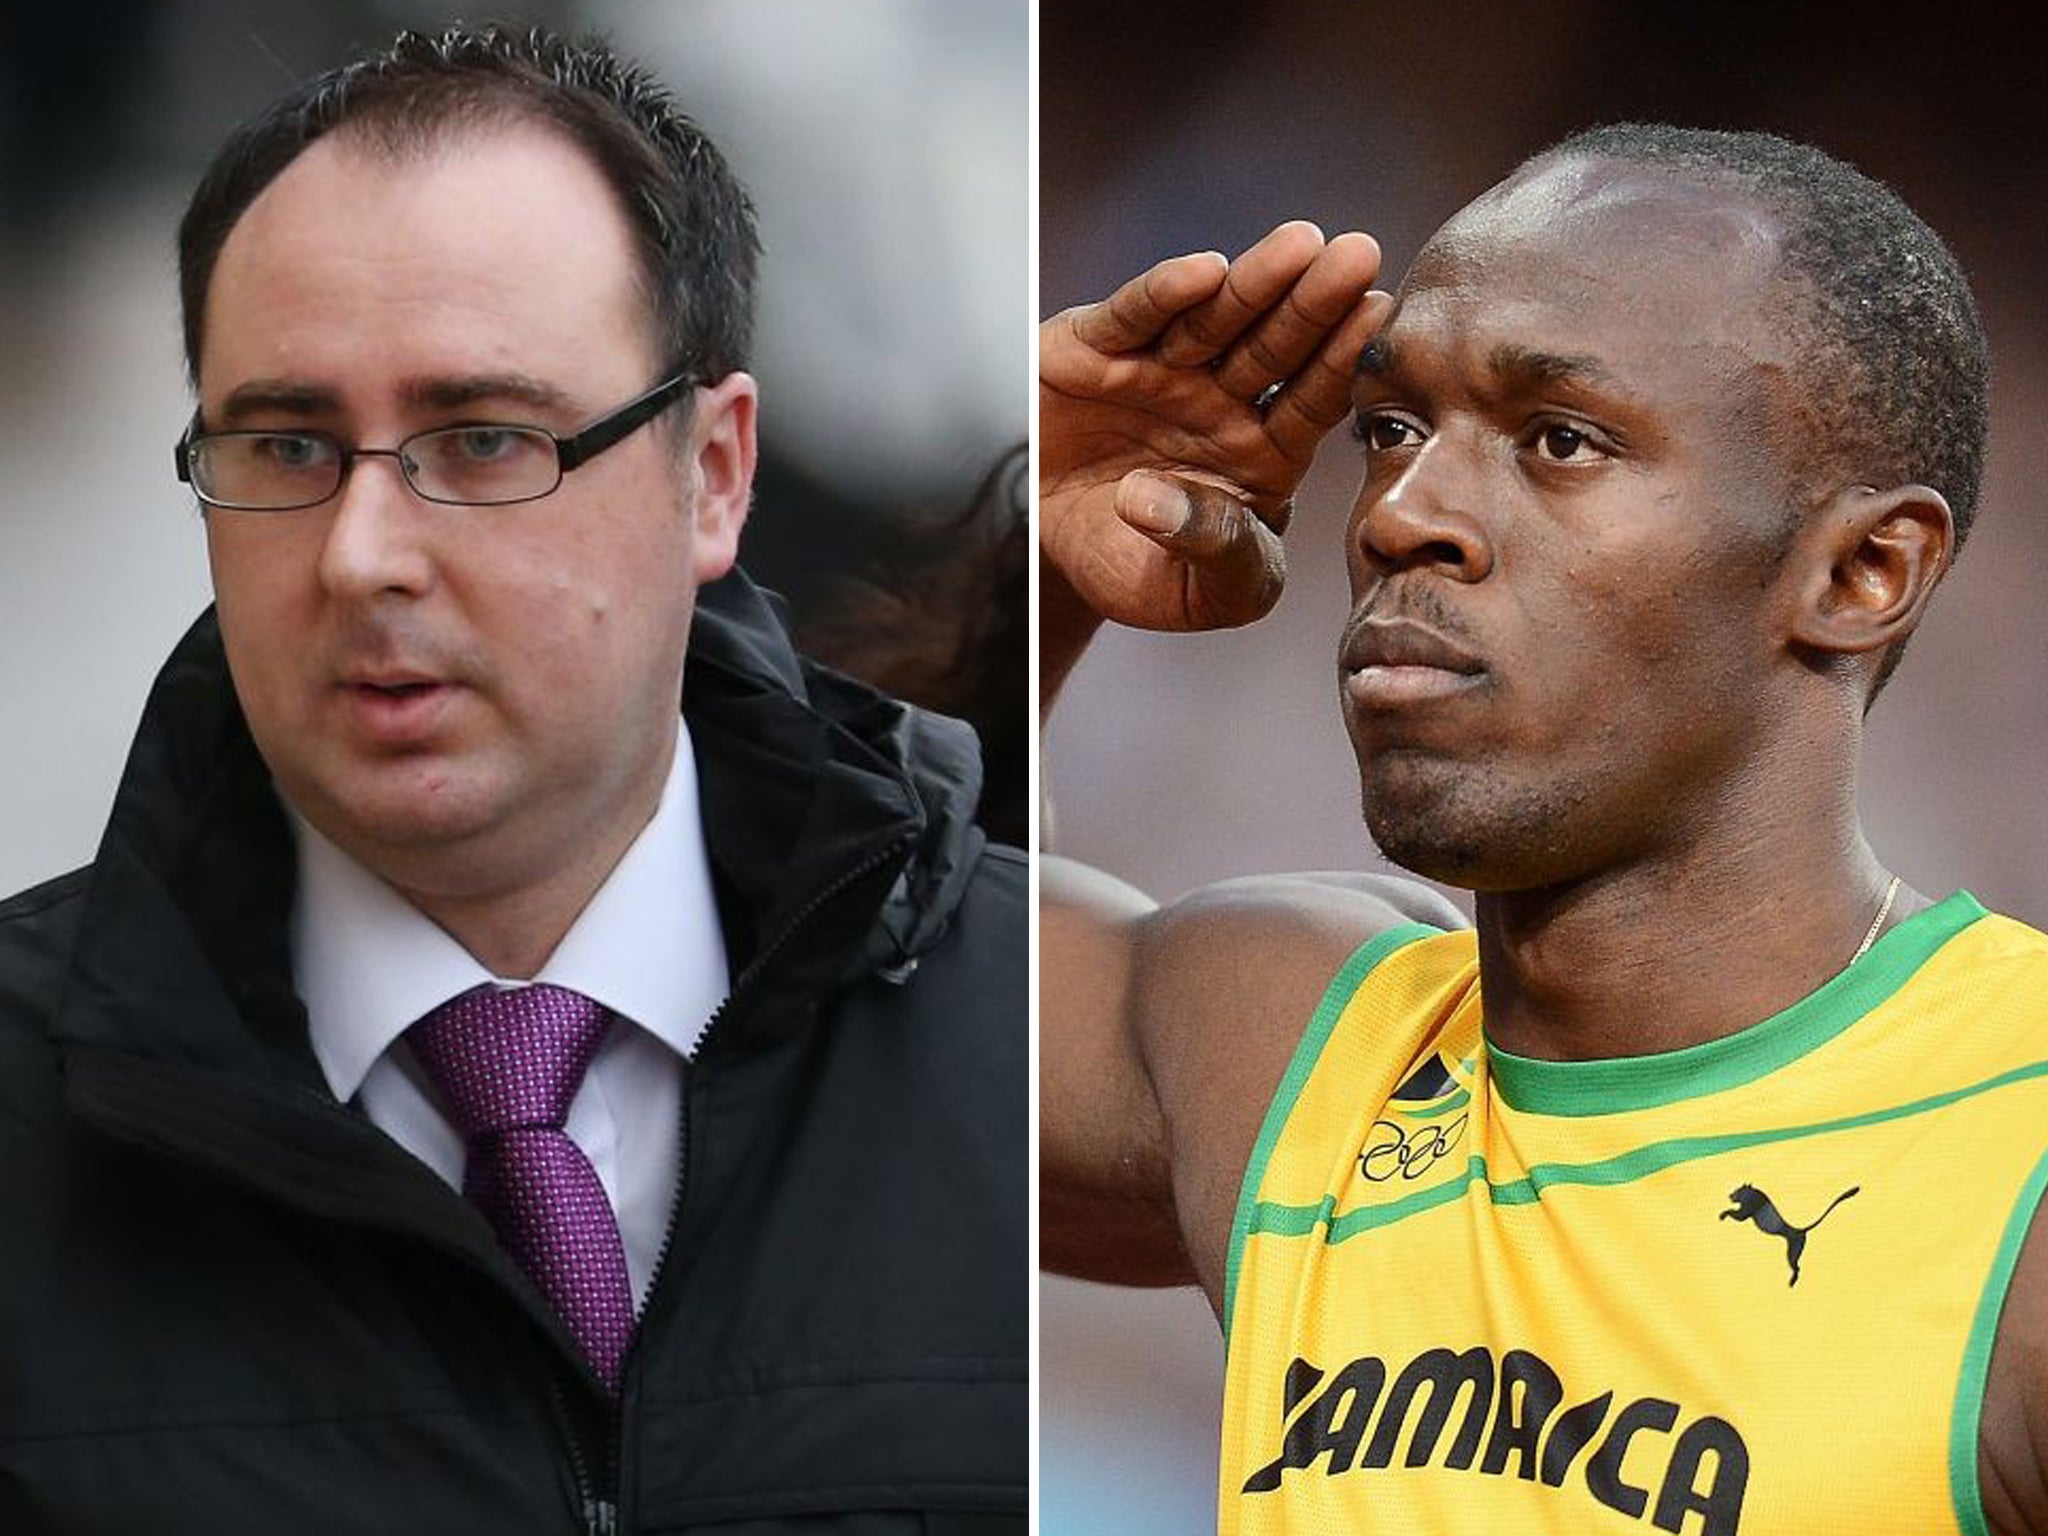 Ashley Gill-Webb, 34, is accused of pushing his way to the front of an exclusive seating area without a ticket and shouting abuse at the Jamaican sprinter Usain Bolt